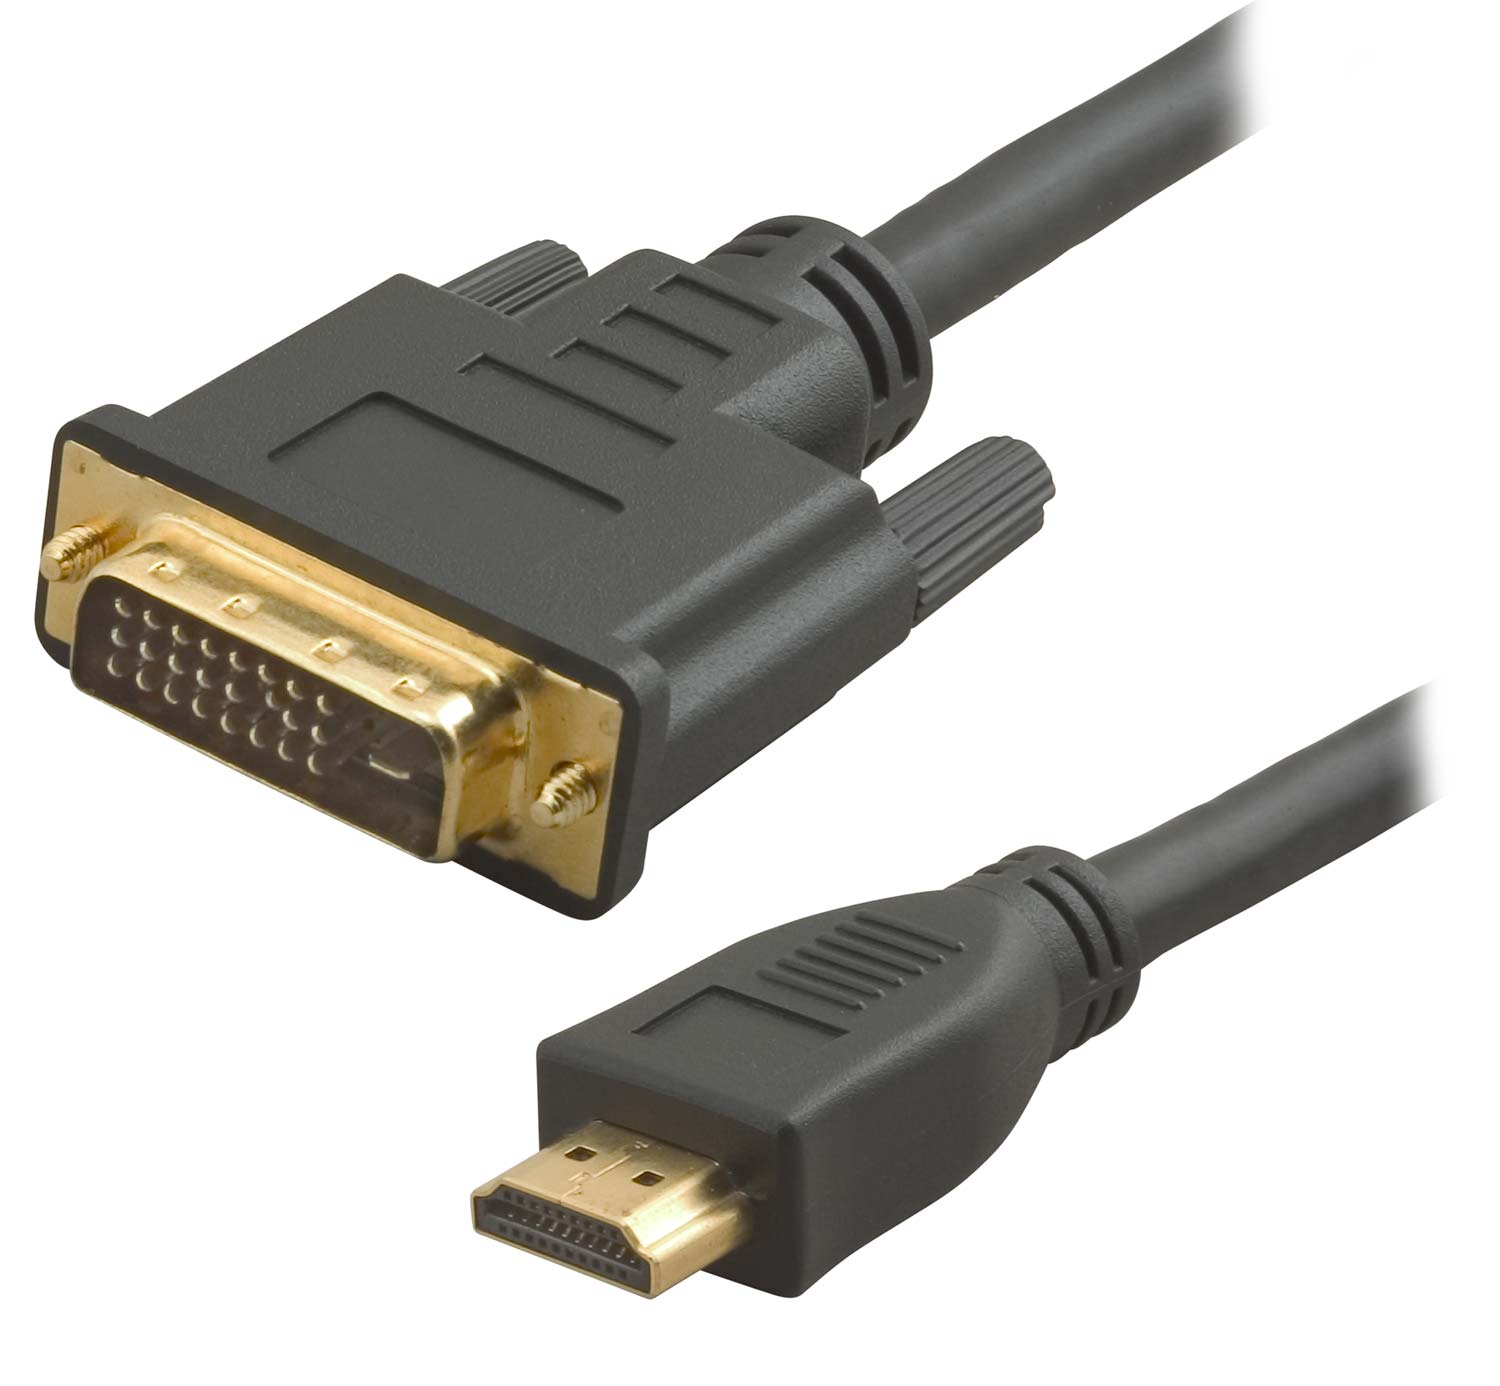 HD00-P: 15 to 50ft Premium DVI to HDMI male to male cable CL2/FT4 Resolution - 1920x1200 / 1080p